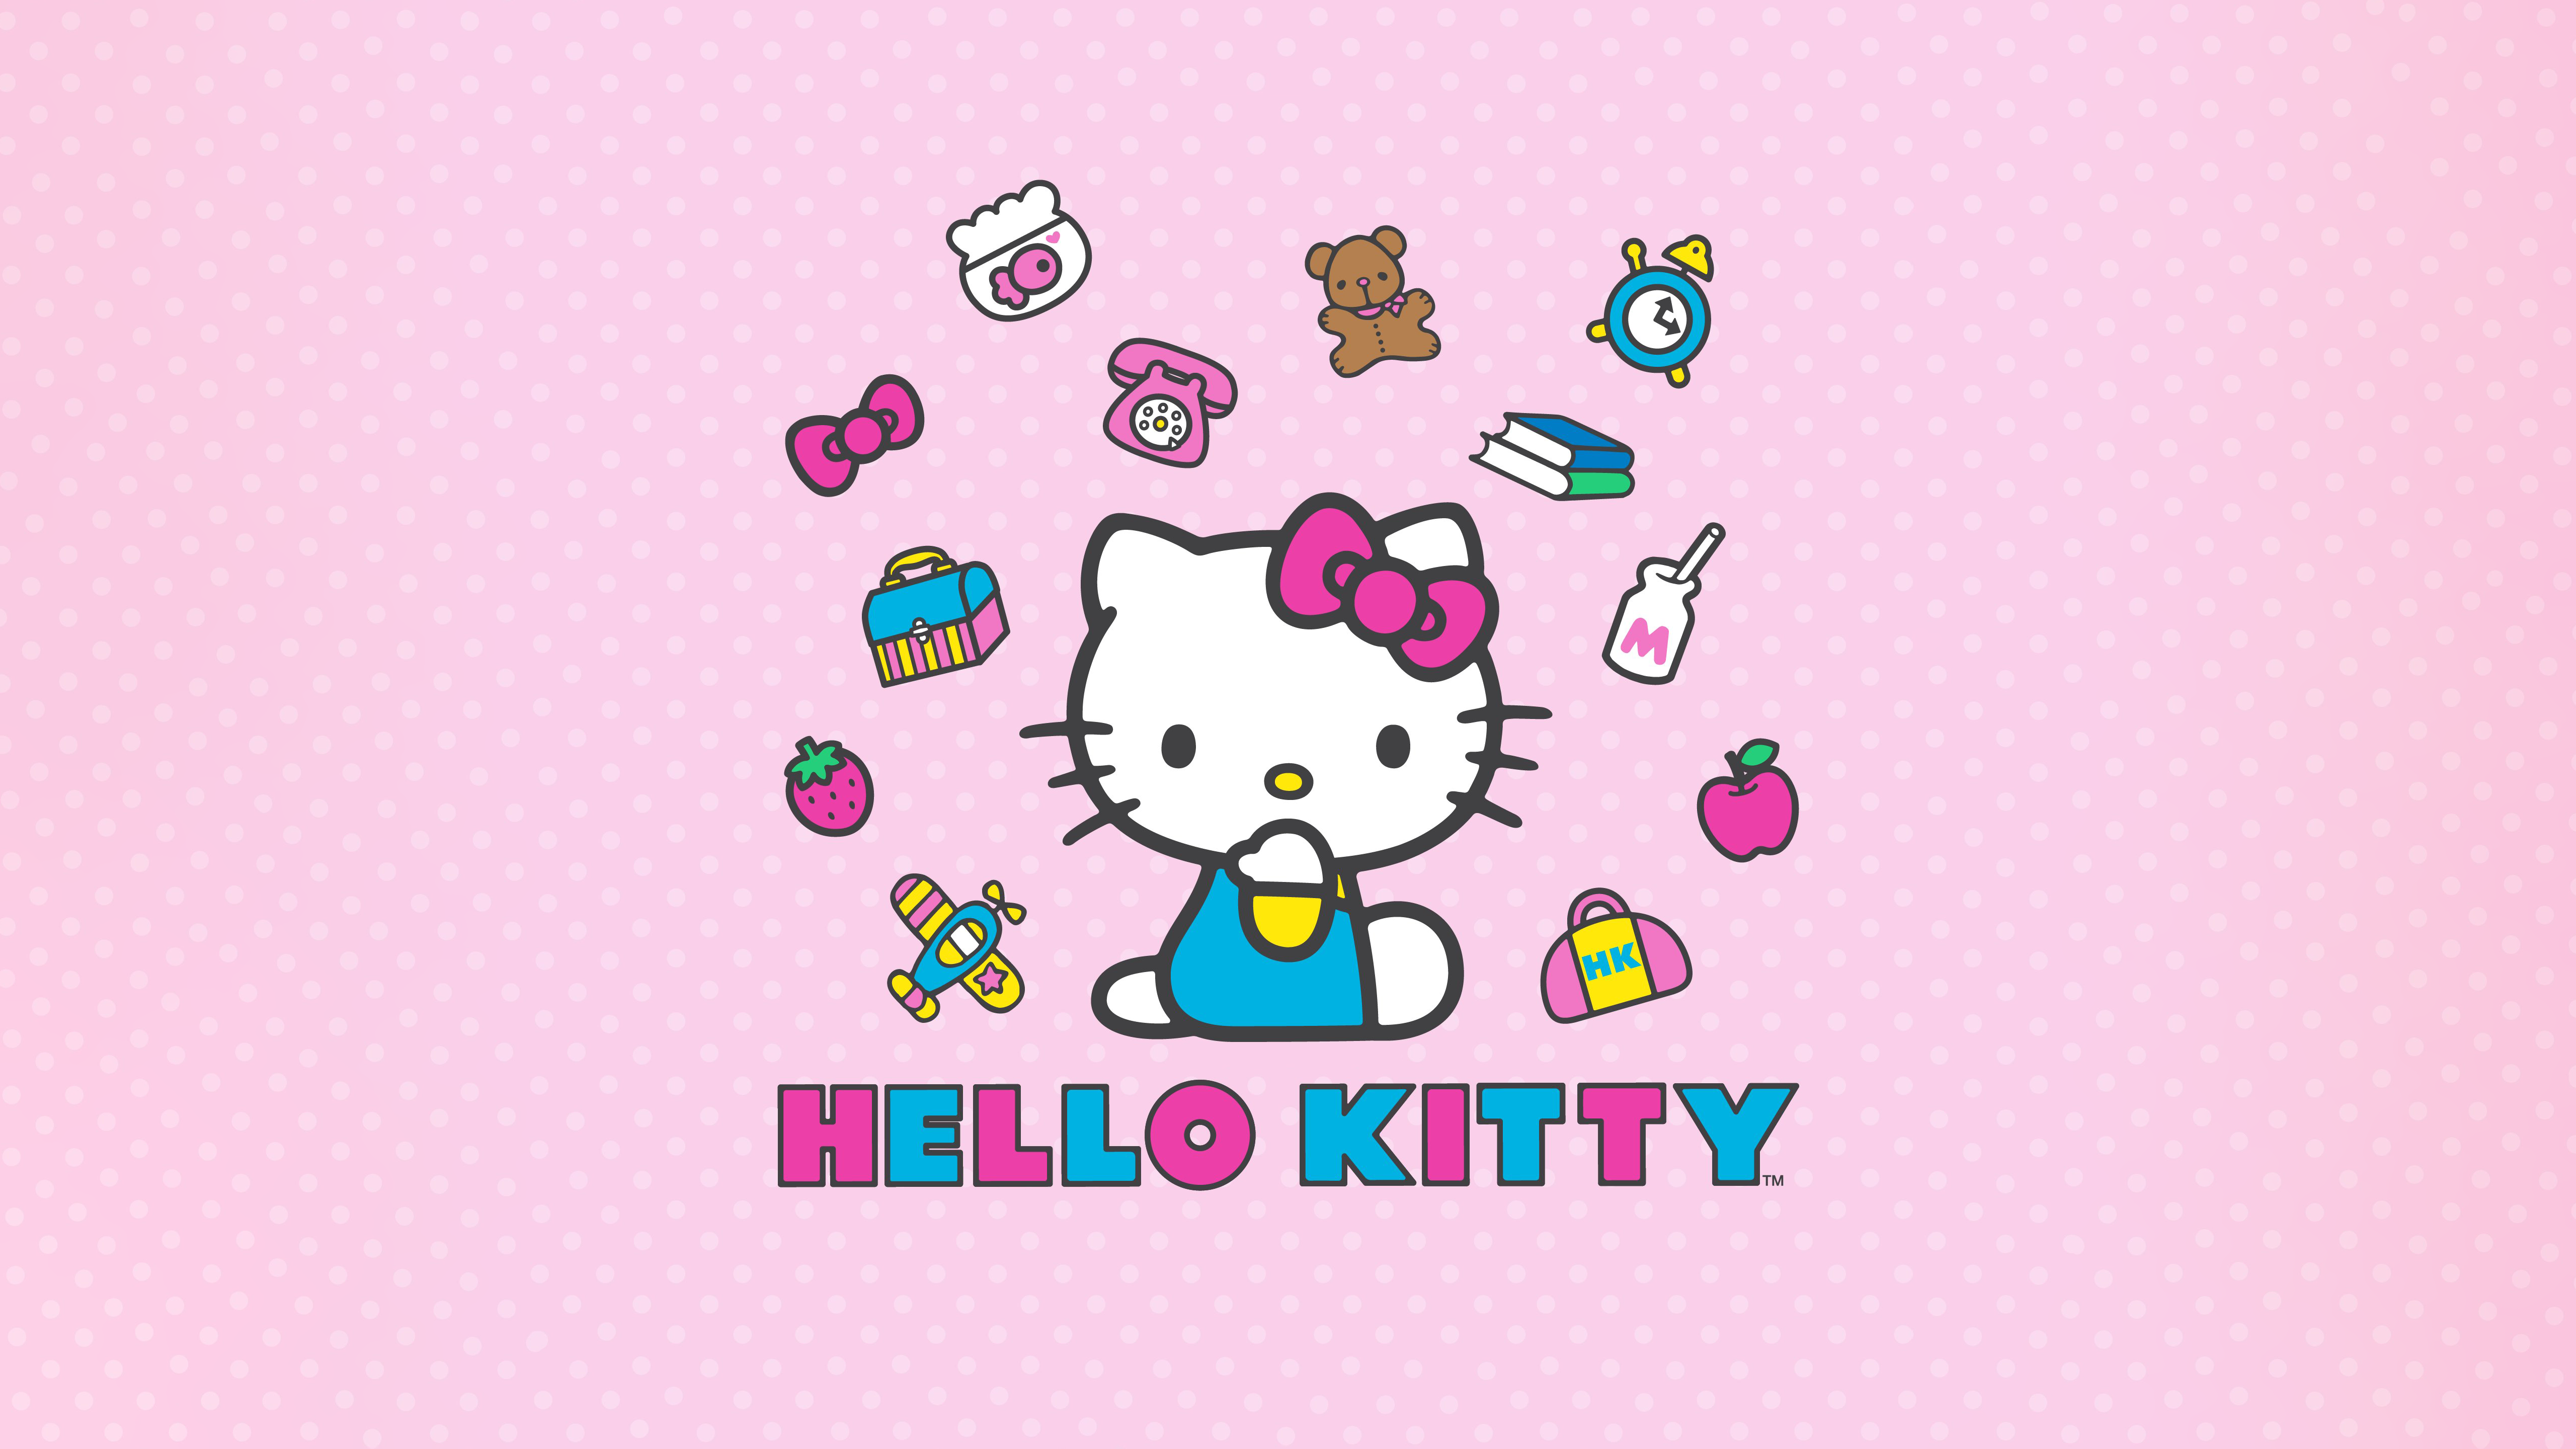 Cute wallpaper for Whatsapp featuring Hello Kitty in pink